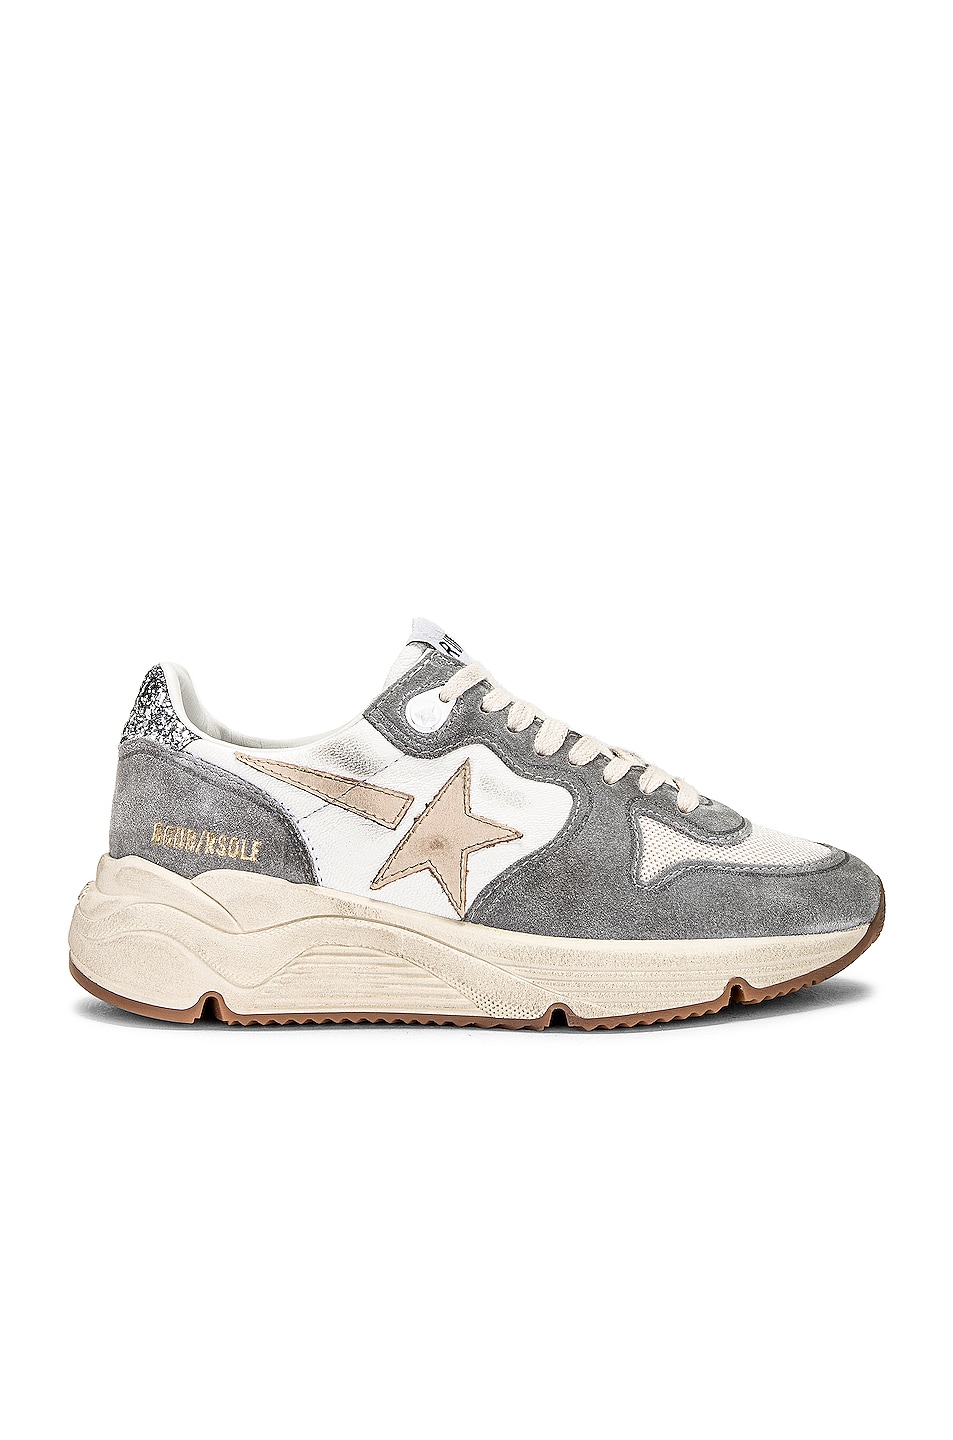 Image 1 of Golden Goose Running Sole Sneaker in Silver, White, Cream, Smoke Grey, & Silver